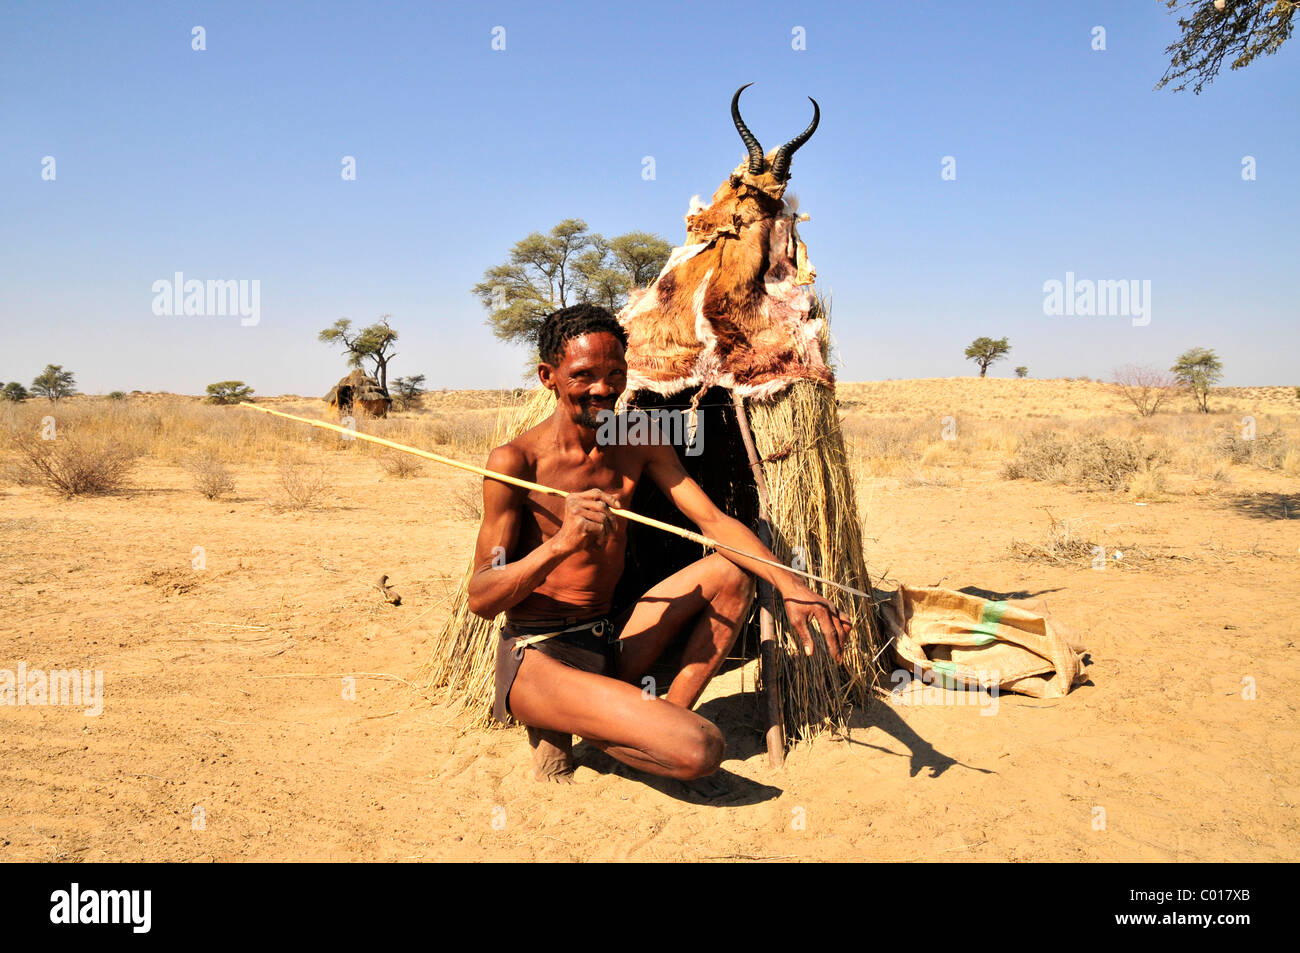 Man of the Khomani-San tribe with spear and traditional clothing in front of a thatched hut in the Kalahari, South Africa Stock Photo